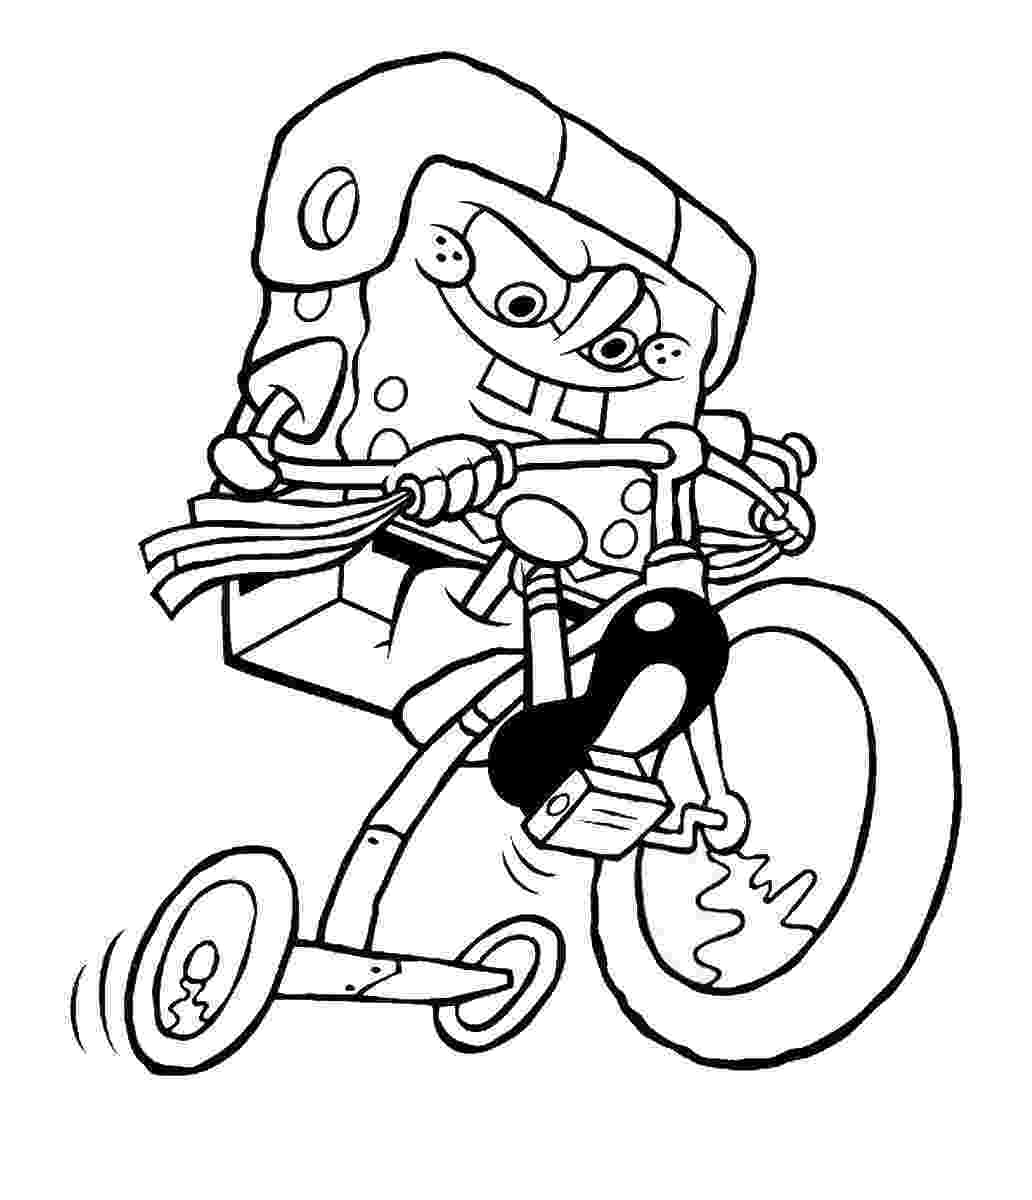 spongebob coloring sheet coloring pages spongebob squarepants coloring pages free spongebob sheet coloring 